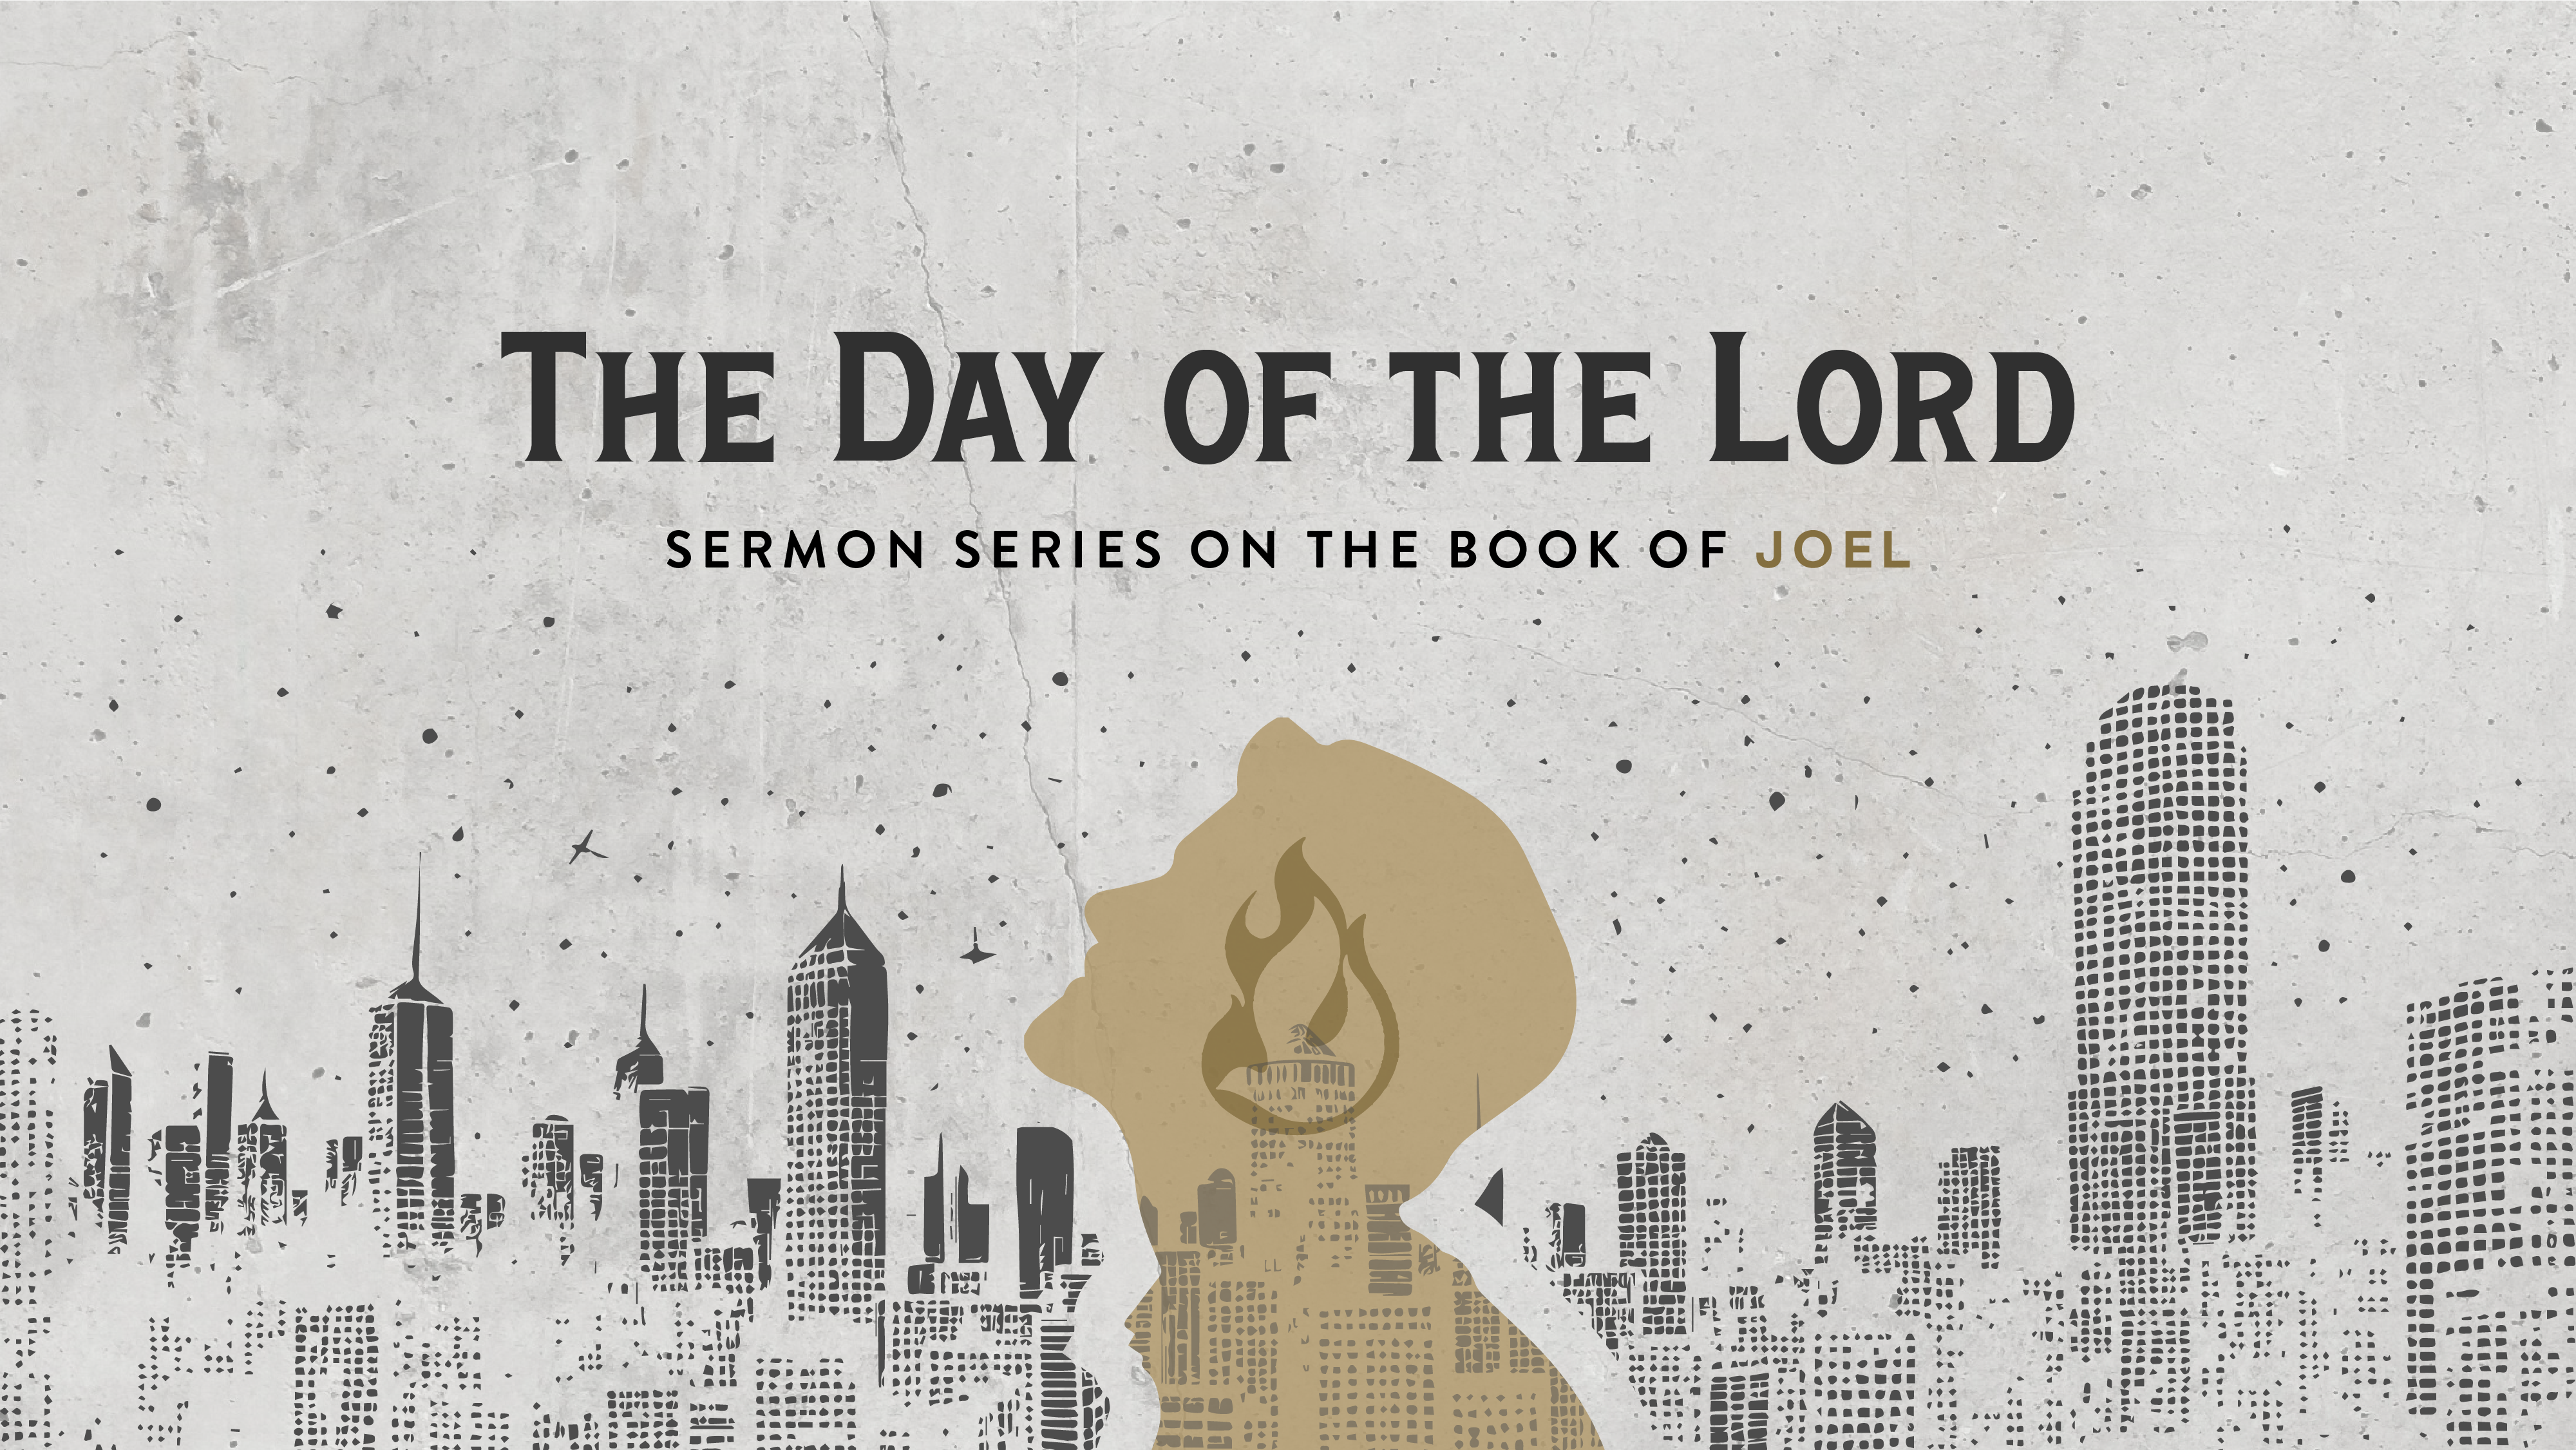 The Day of the LORD, Part 1: “The Devastation of Locusts”